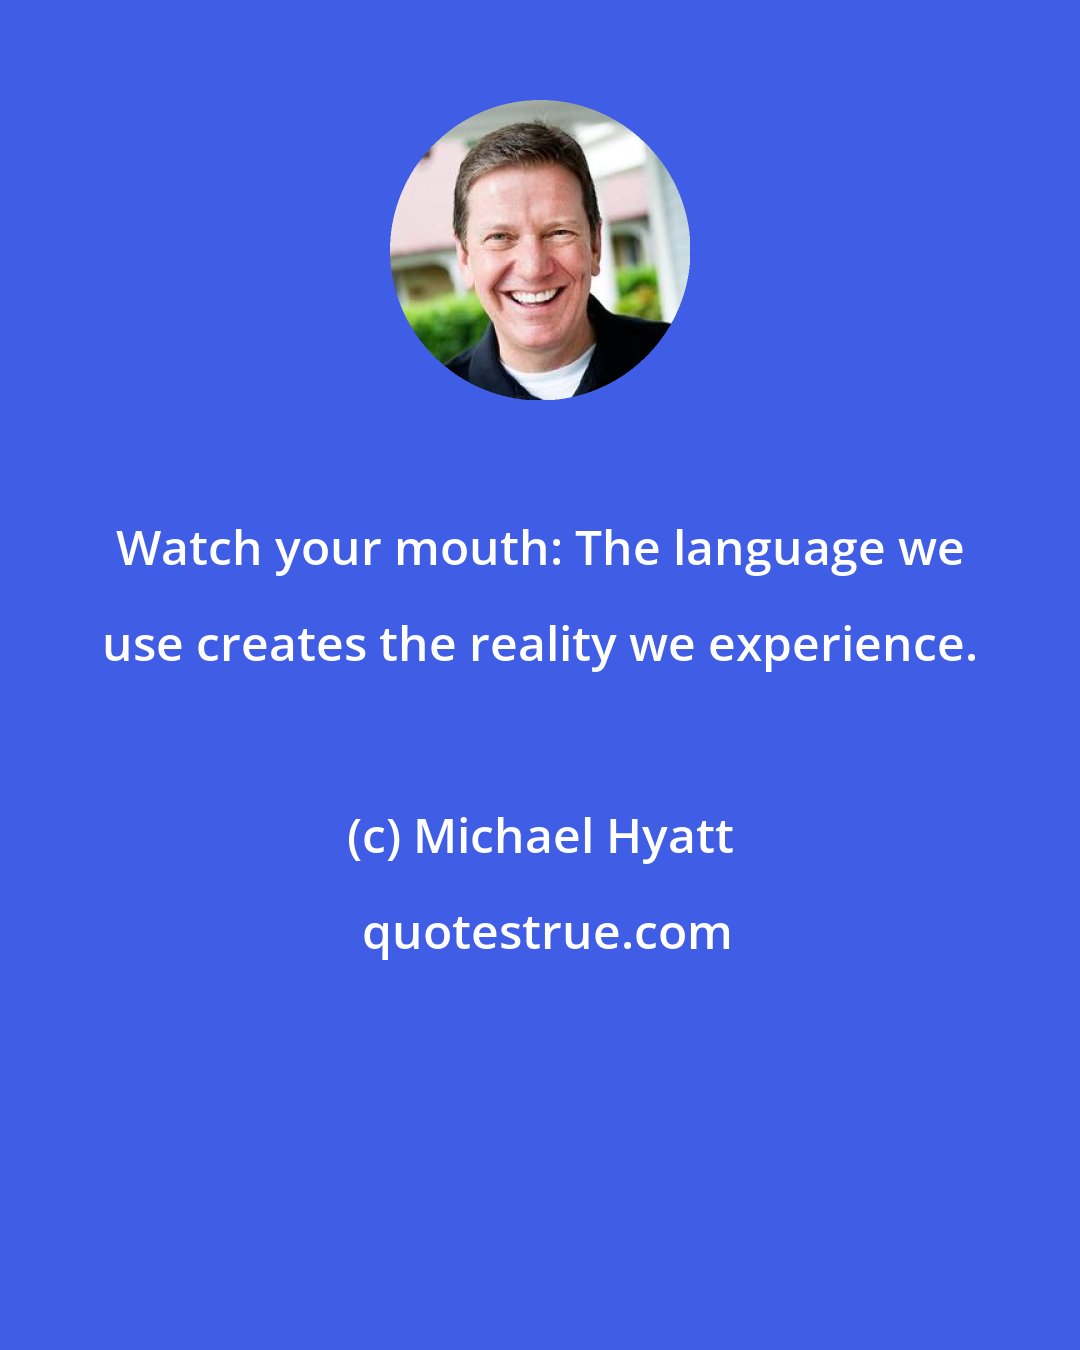 Michael Hyatt: Watch your mouth: The language we use creates the reality we experience.